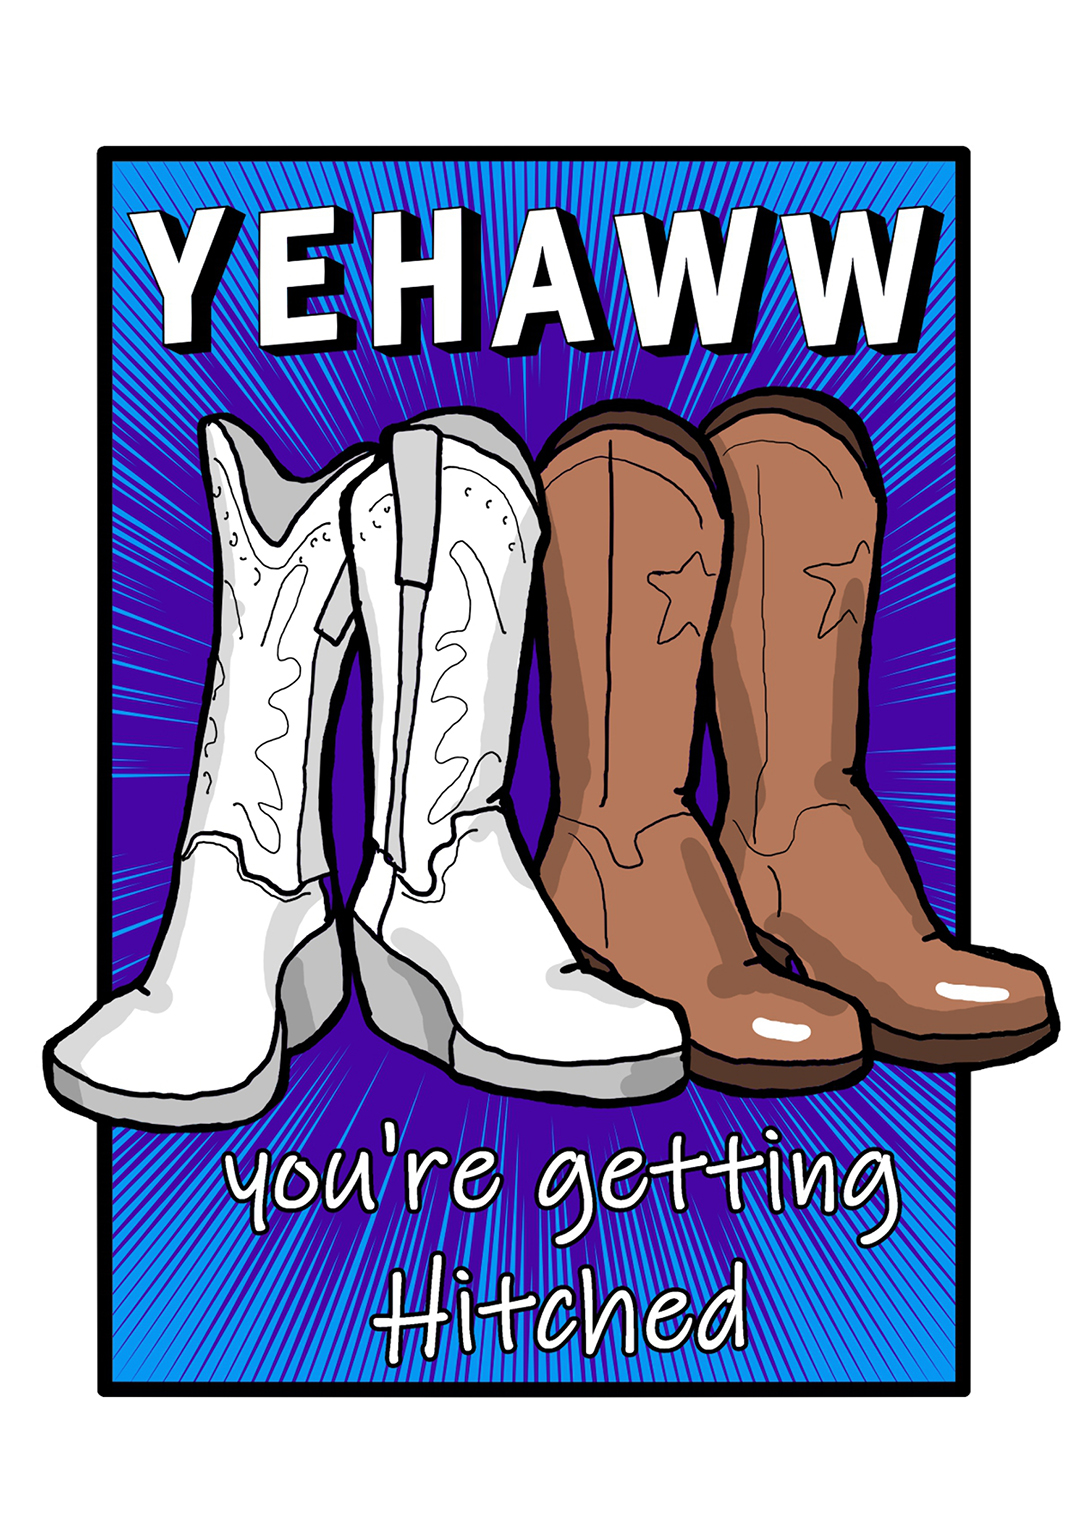 Yehaww - You're Getting Hitched